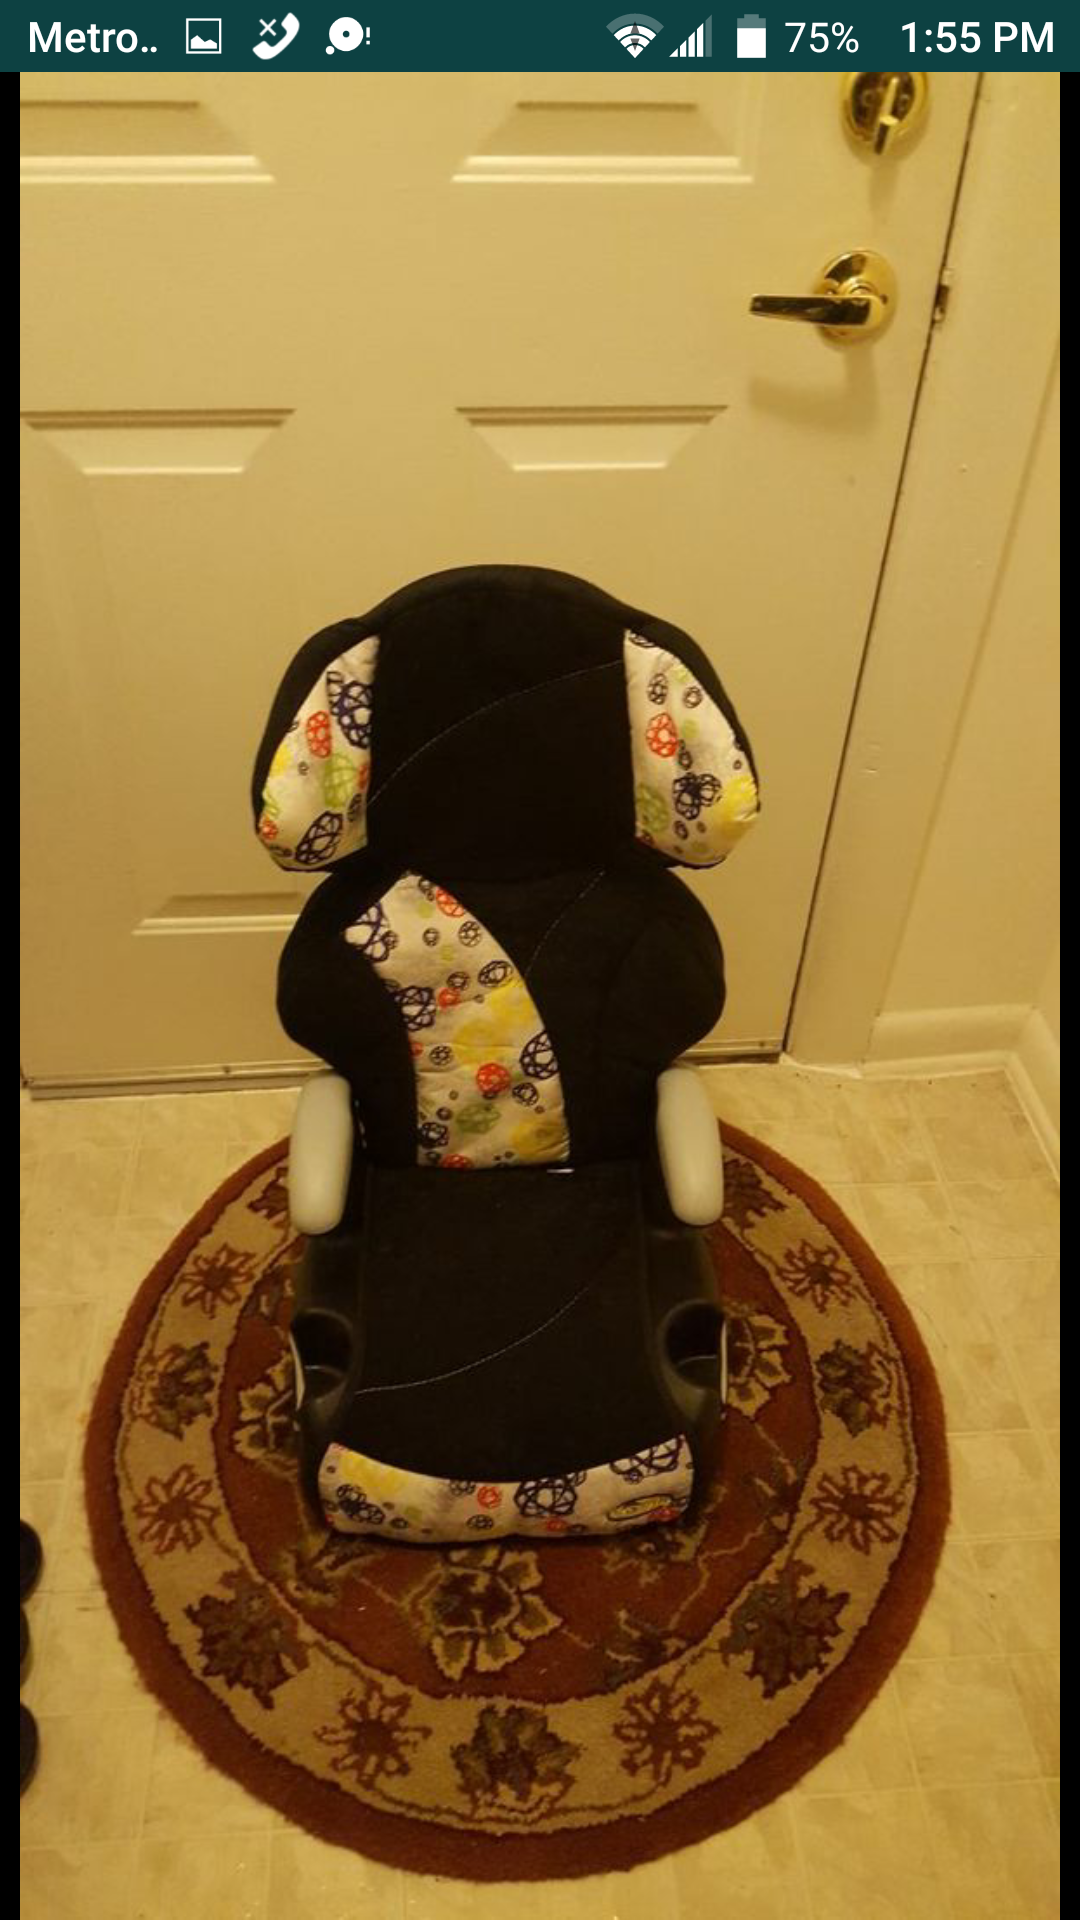 Child's Booster seat